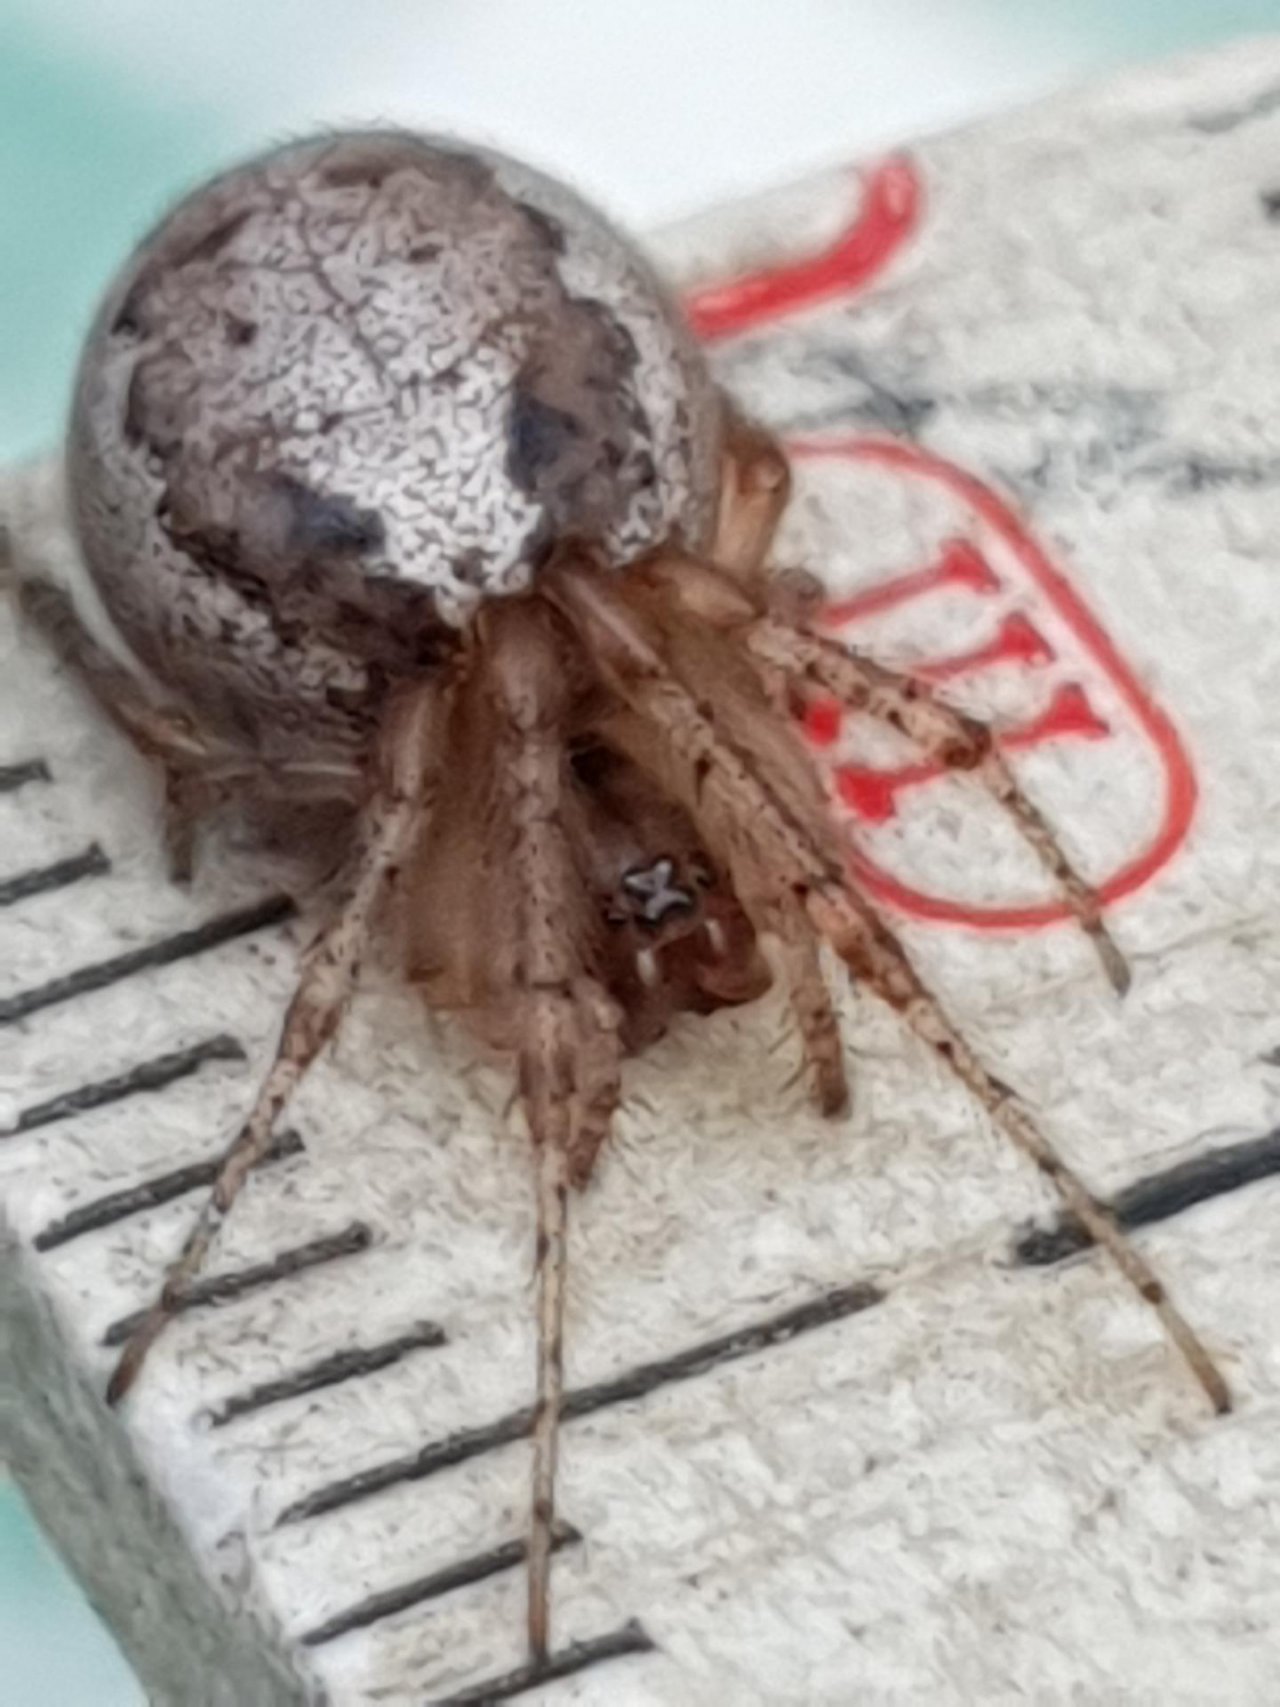 Silver-sided Sector Spider in SpiderSpotter App spotted by Paul Vernelen on 25.09.2020